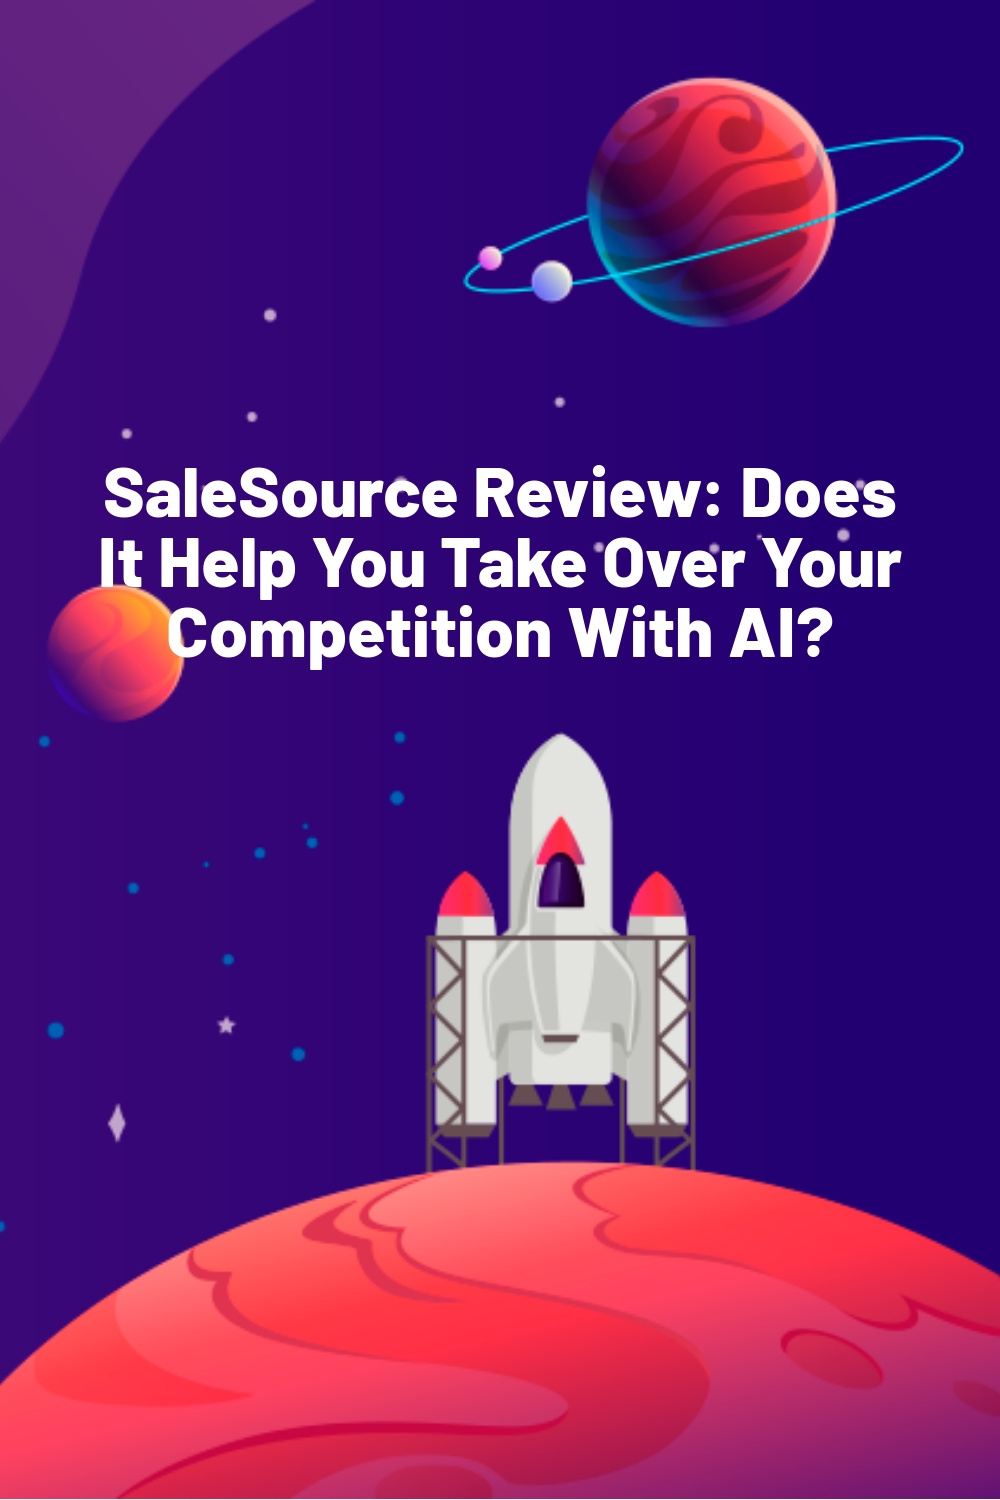 SaleSource Review: Does It Help You Take Over Your Competition With AI?